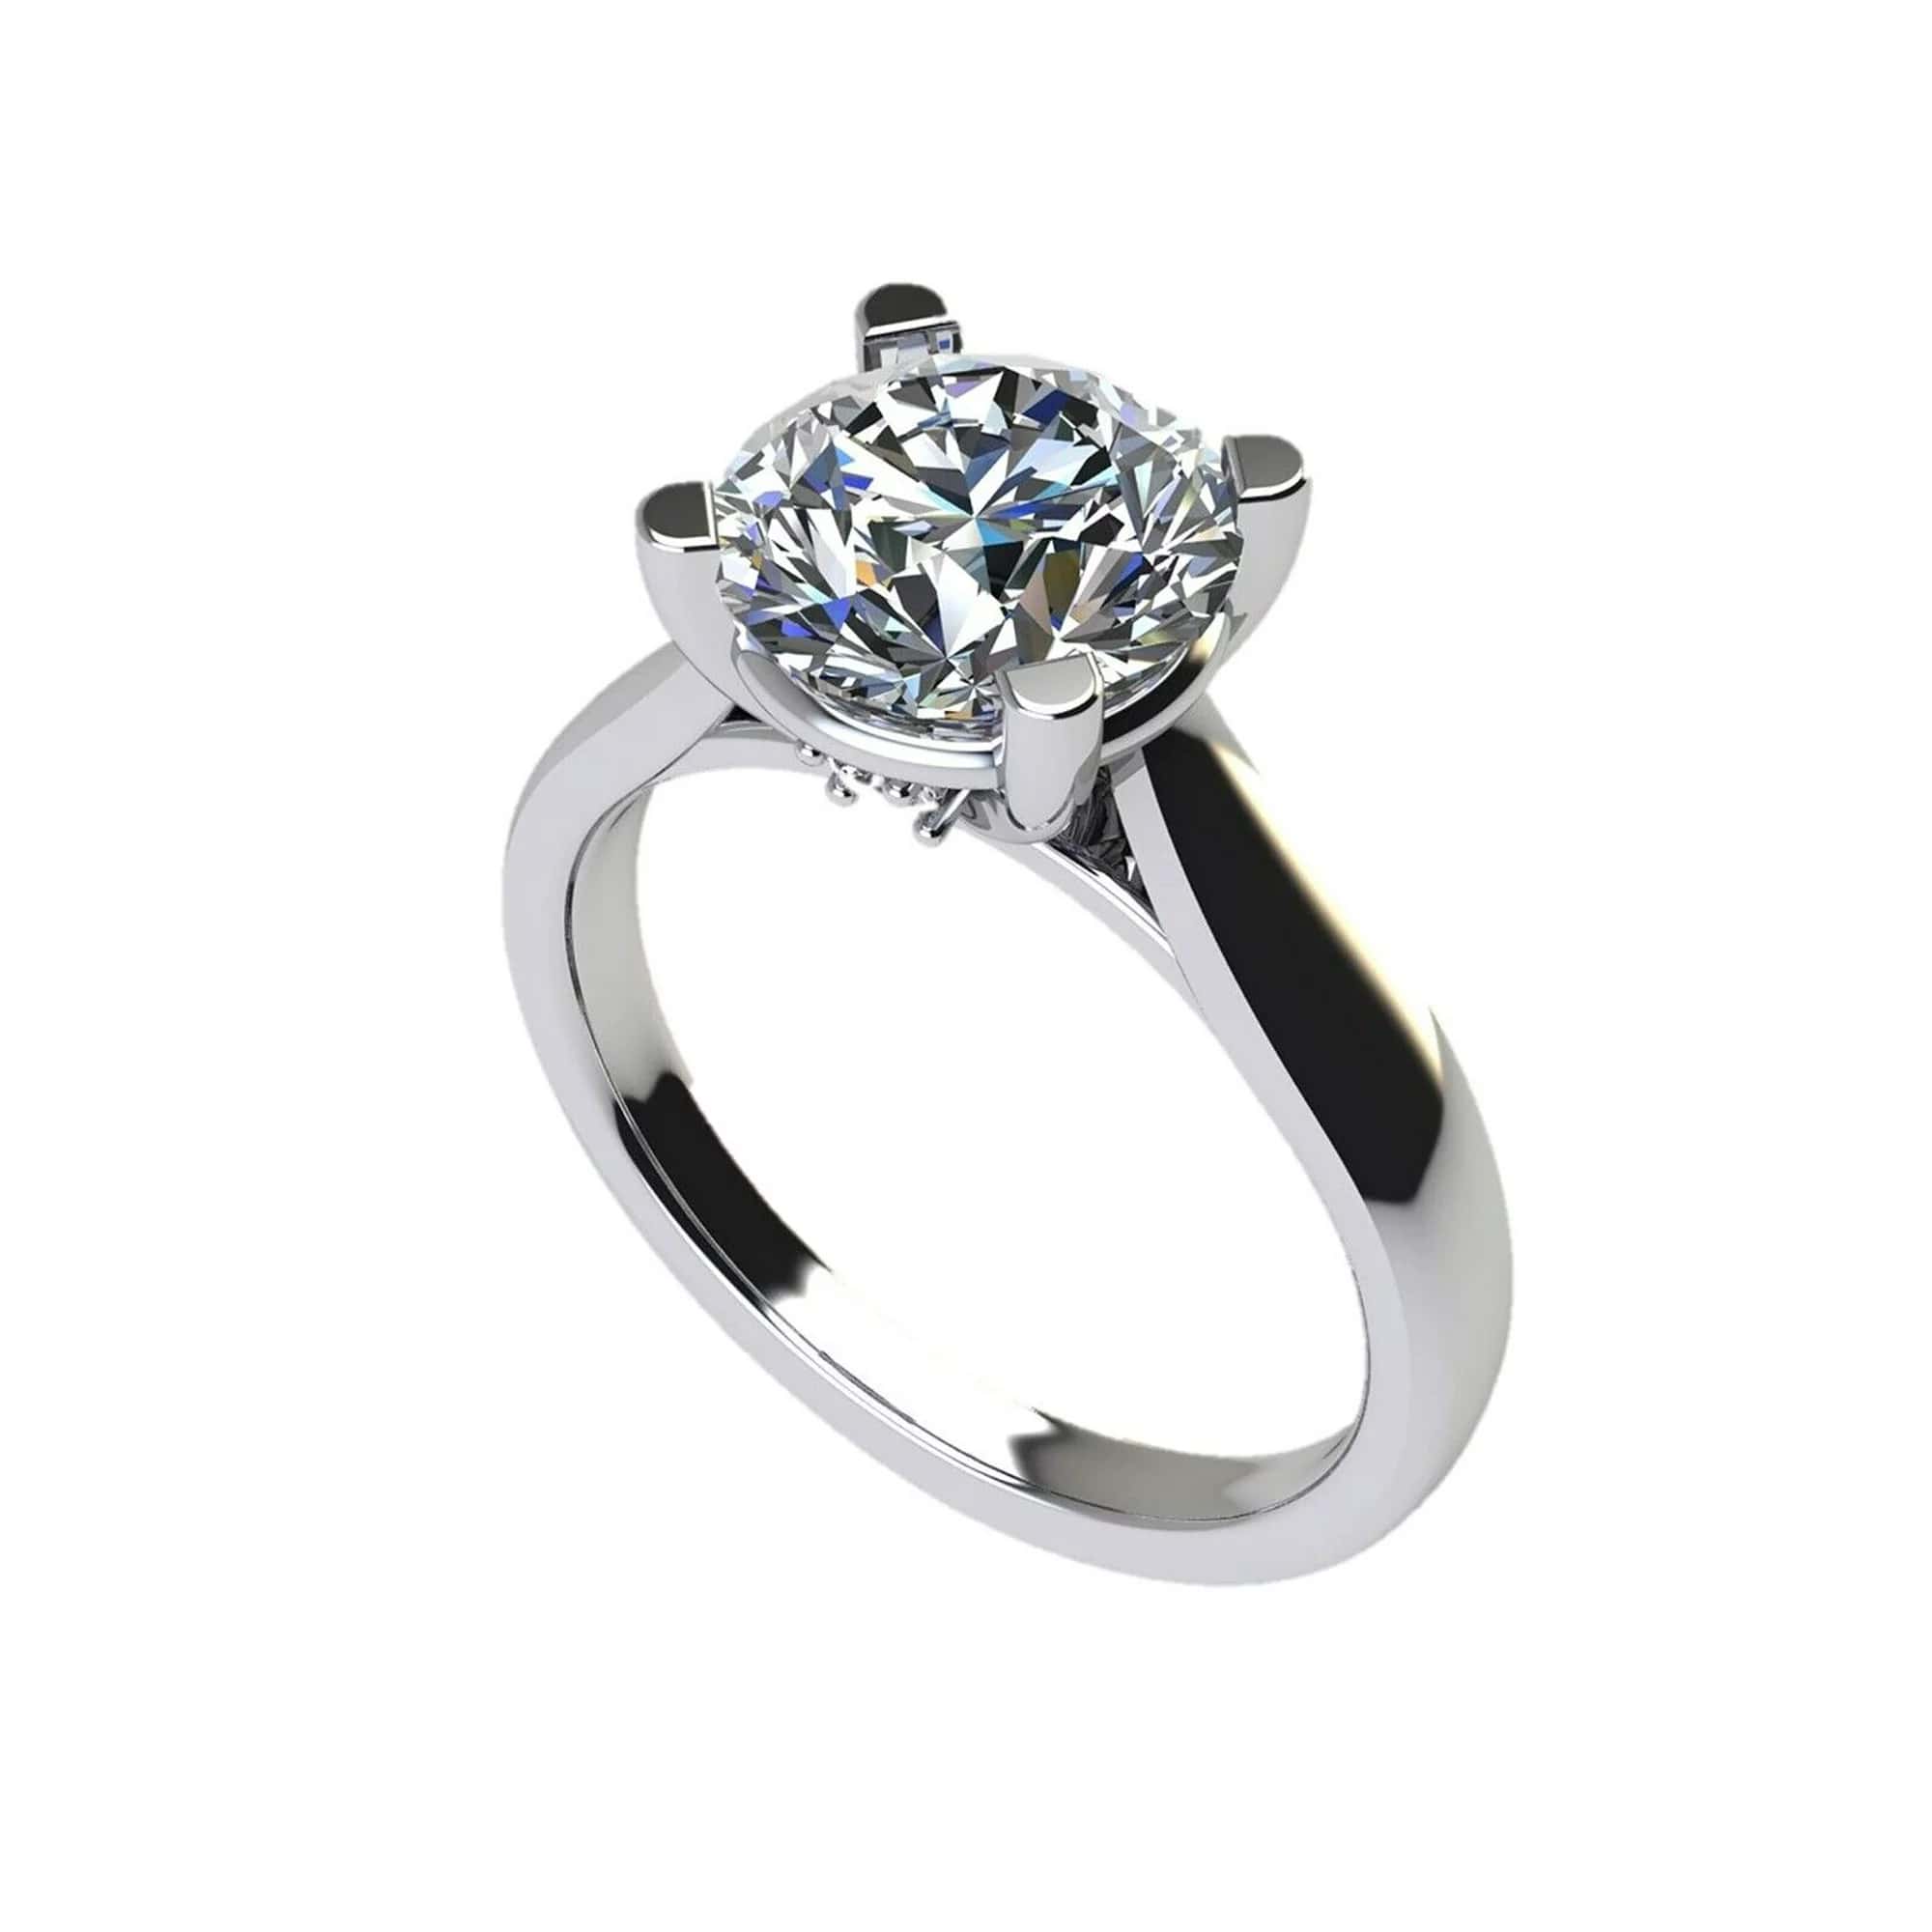  "Capture Hearts with NANA Jewels Lucita Solitaire Engagement Ring!"